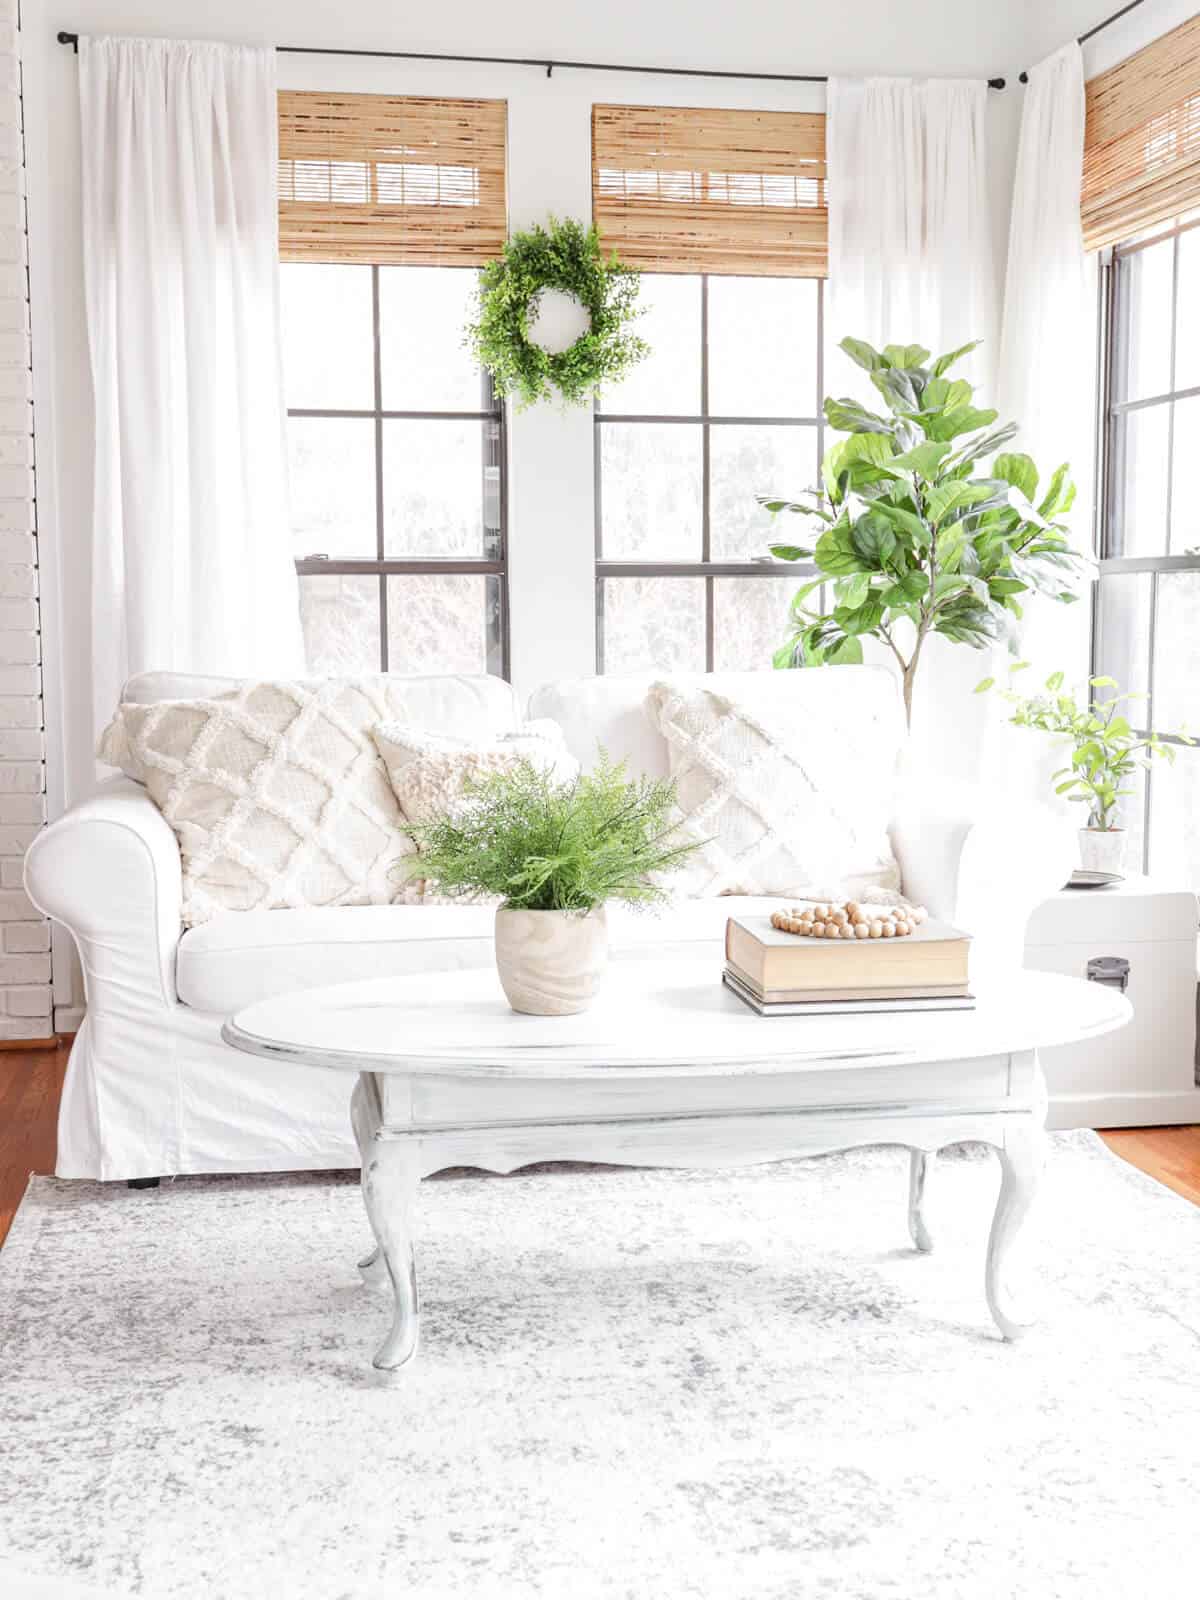 Sunroom Decorating Ideas for Spring